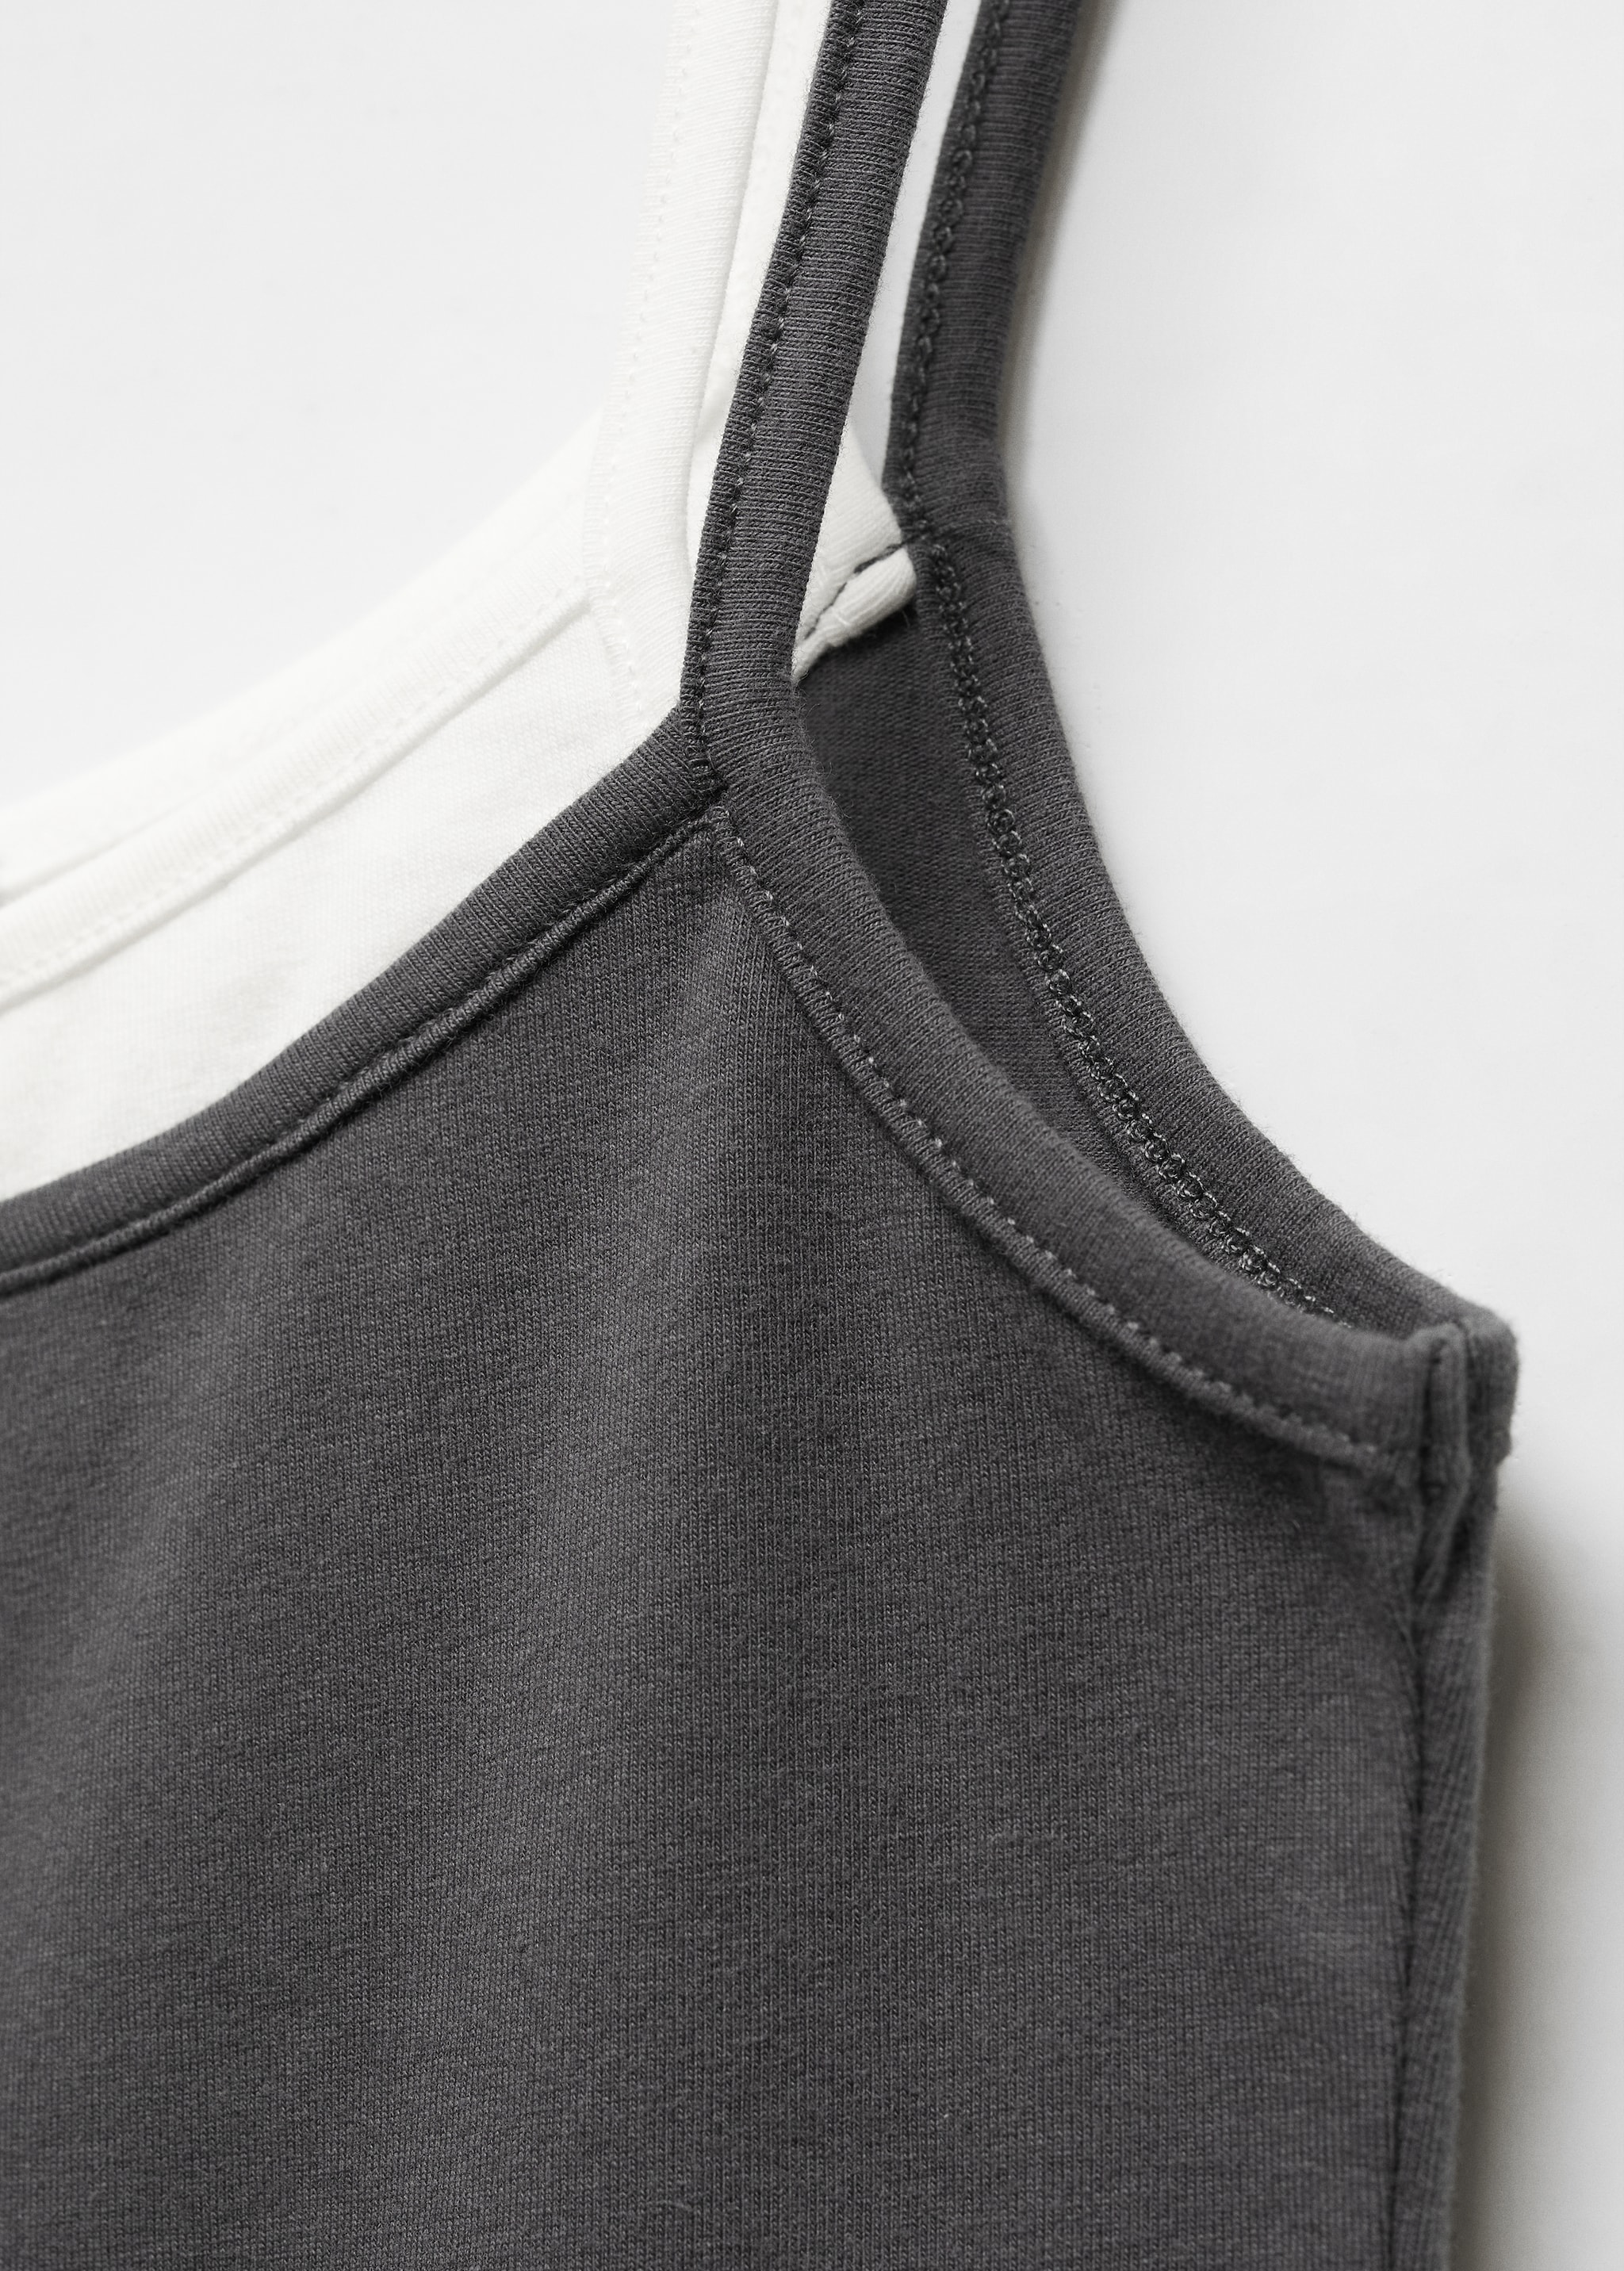 Combination top with thin straps - Details of the article 8